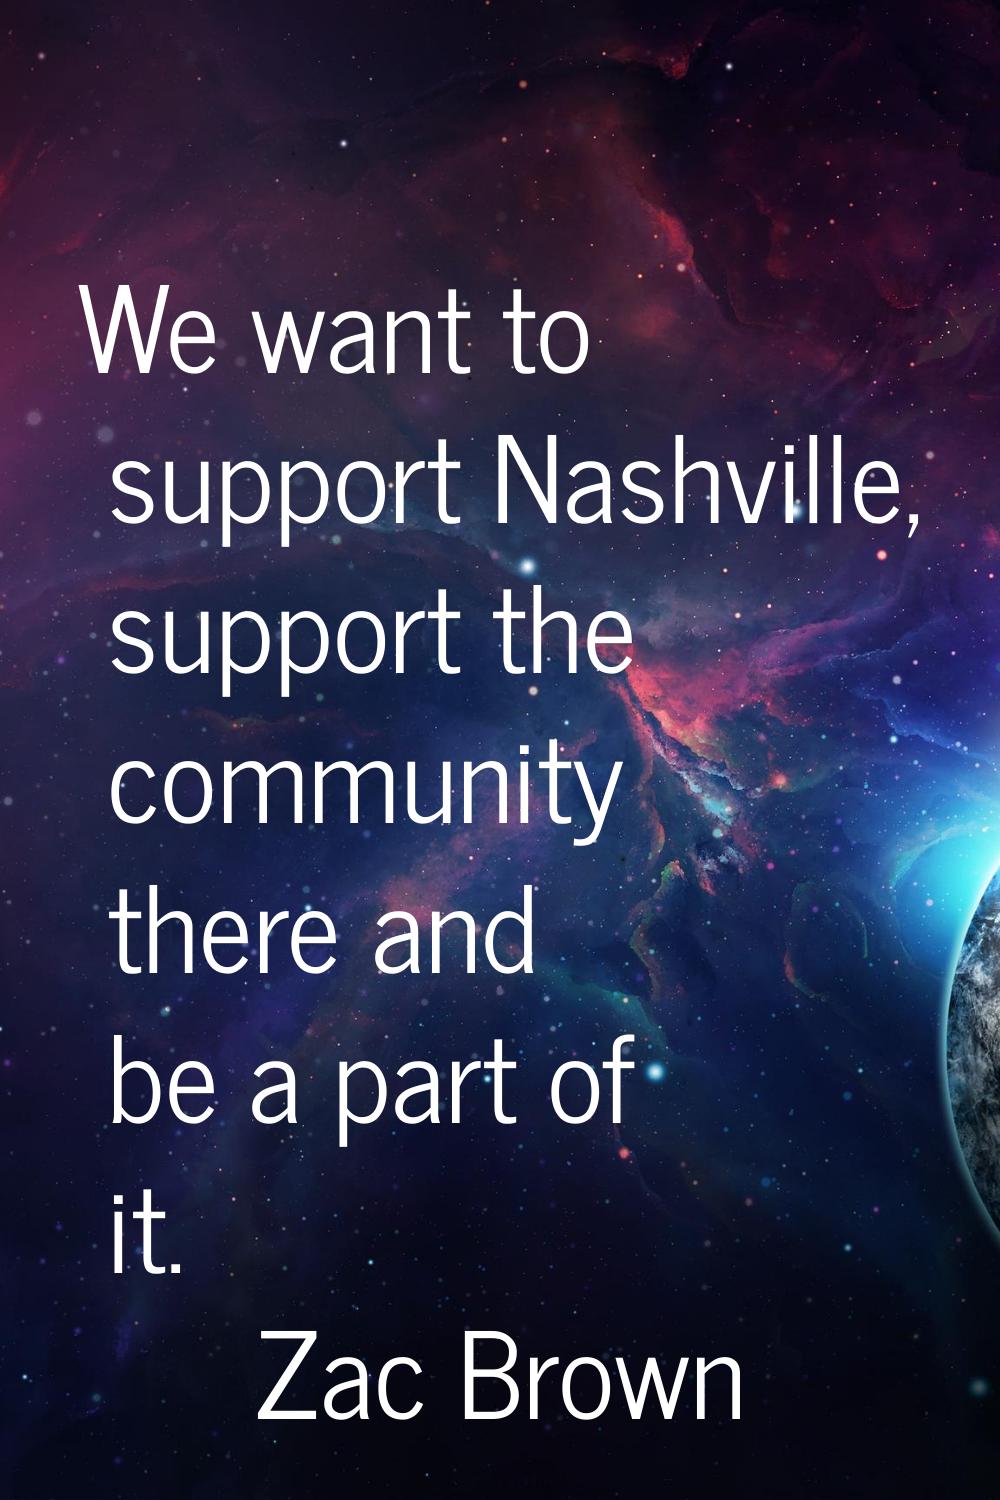 We want to support Nashville, support the community there and be a part of it.